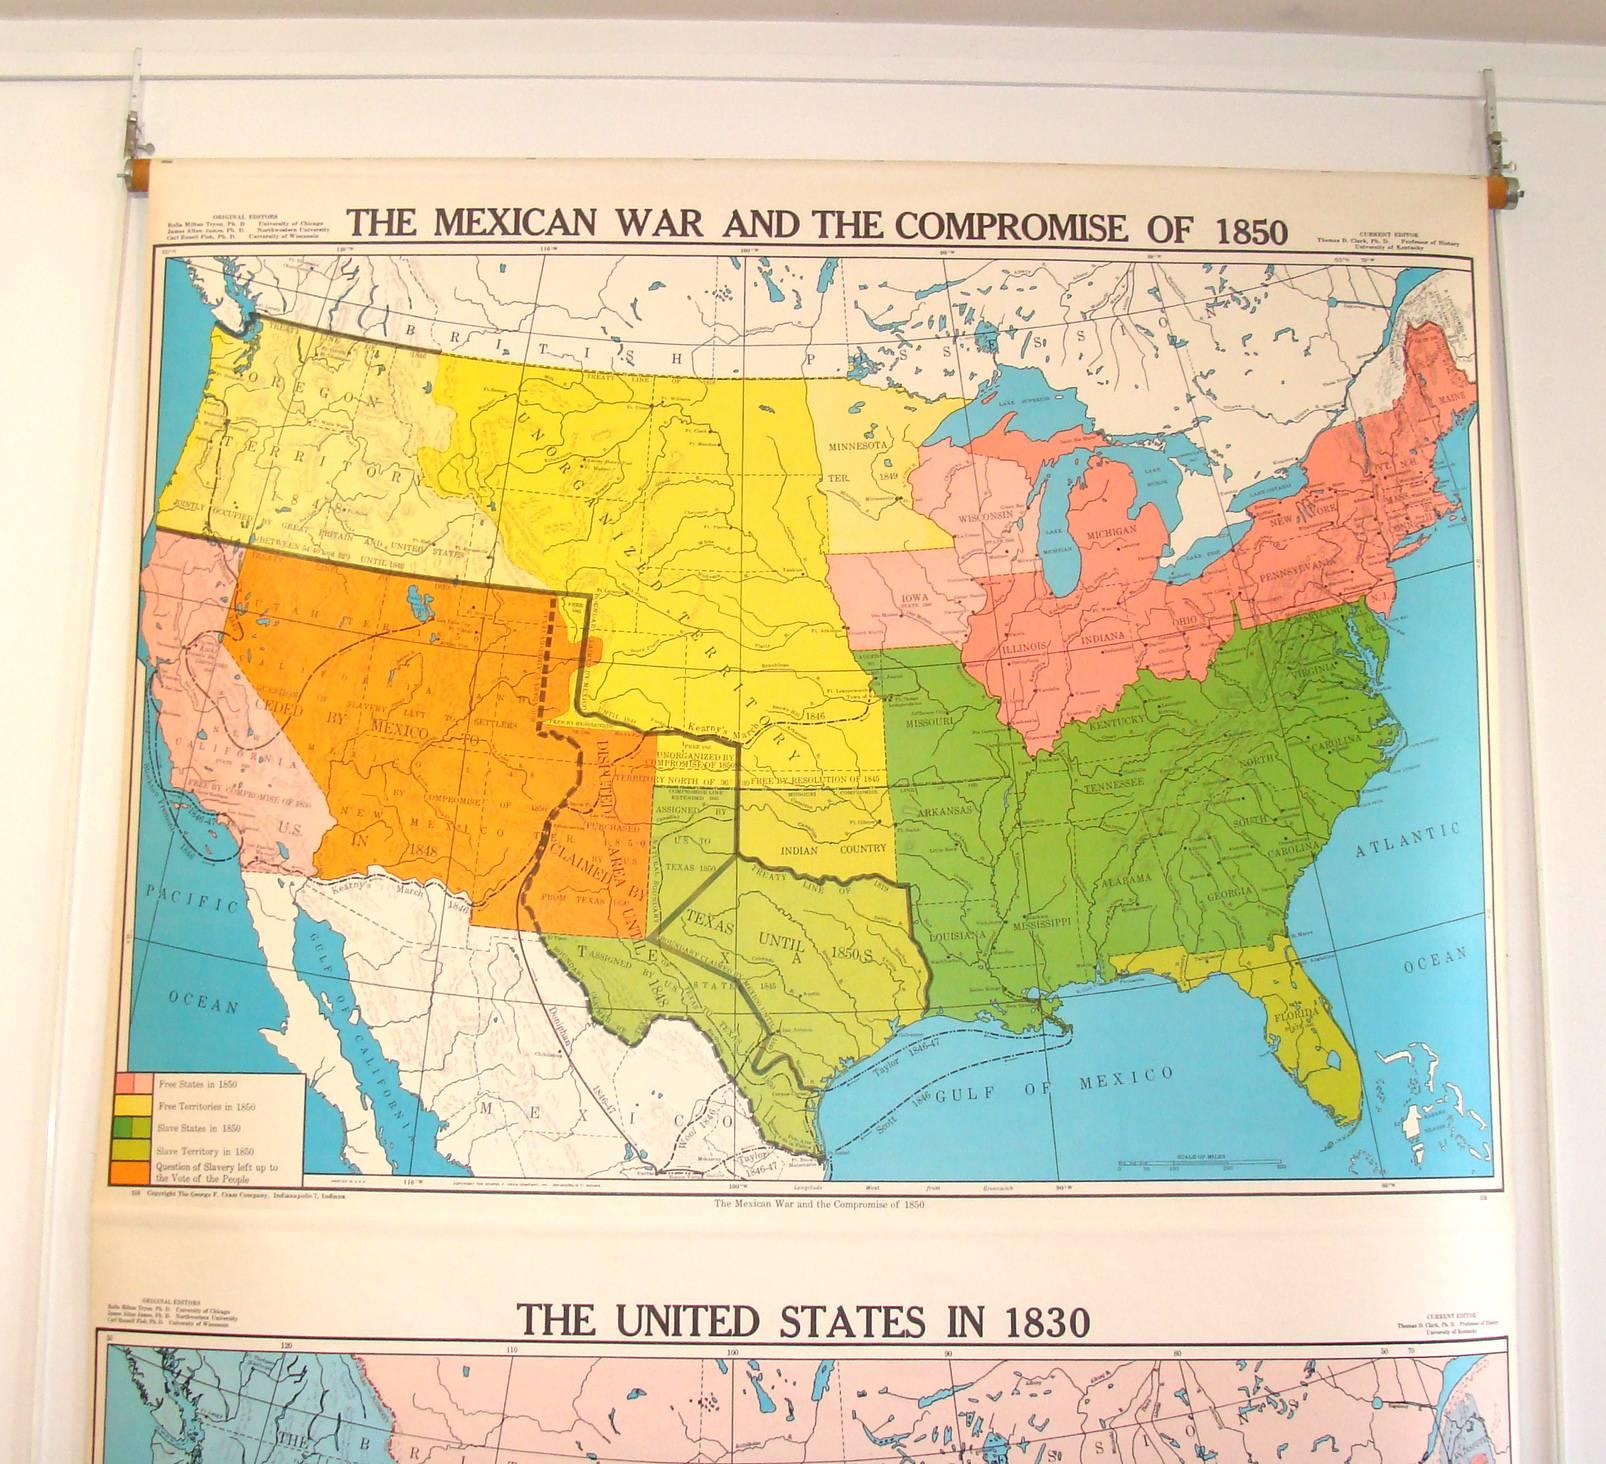 Superb pull-down wall map reflecting U.S. territorial changes between 1830 and 1850. Executed by the legendary George F. Cram company. Printed in the 1950's and likely a custom order. Map comprised of two individual maps adhered to a common backing.